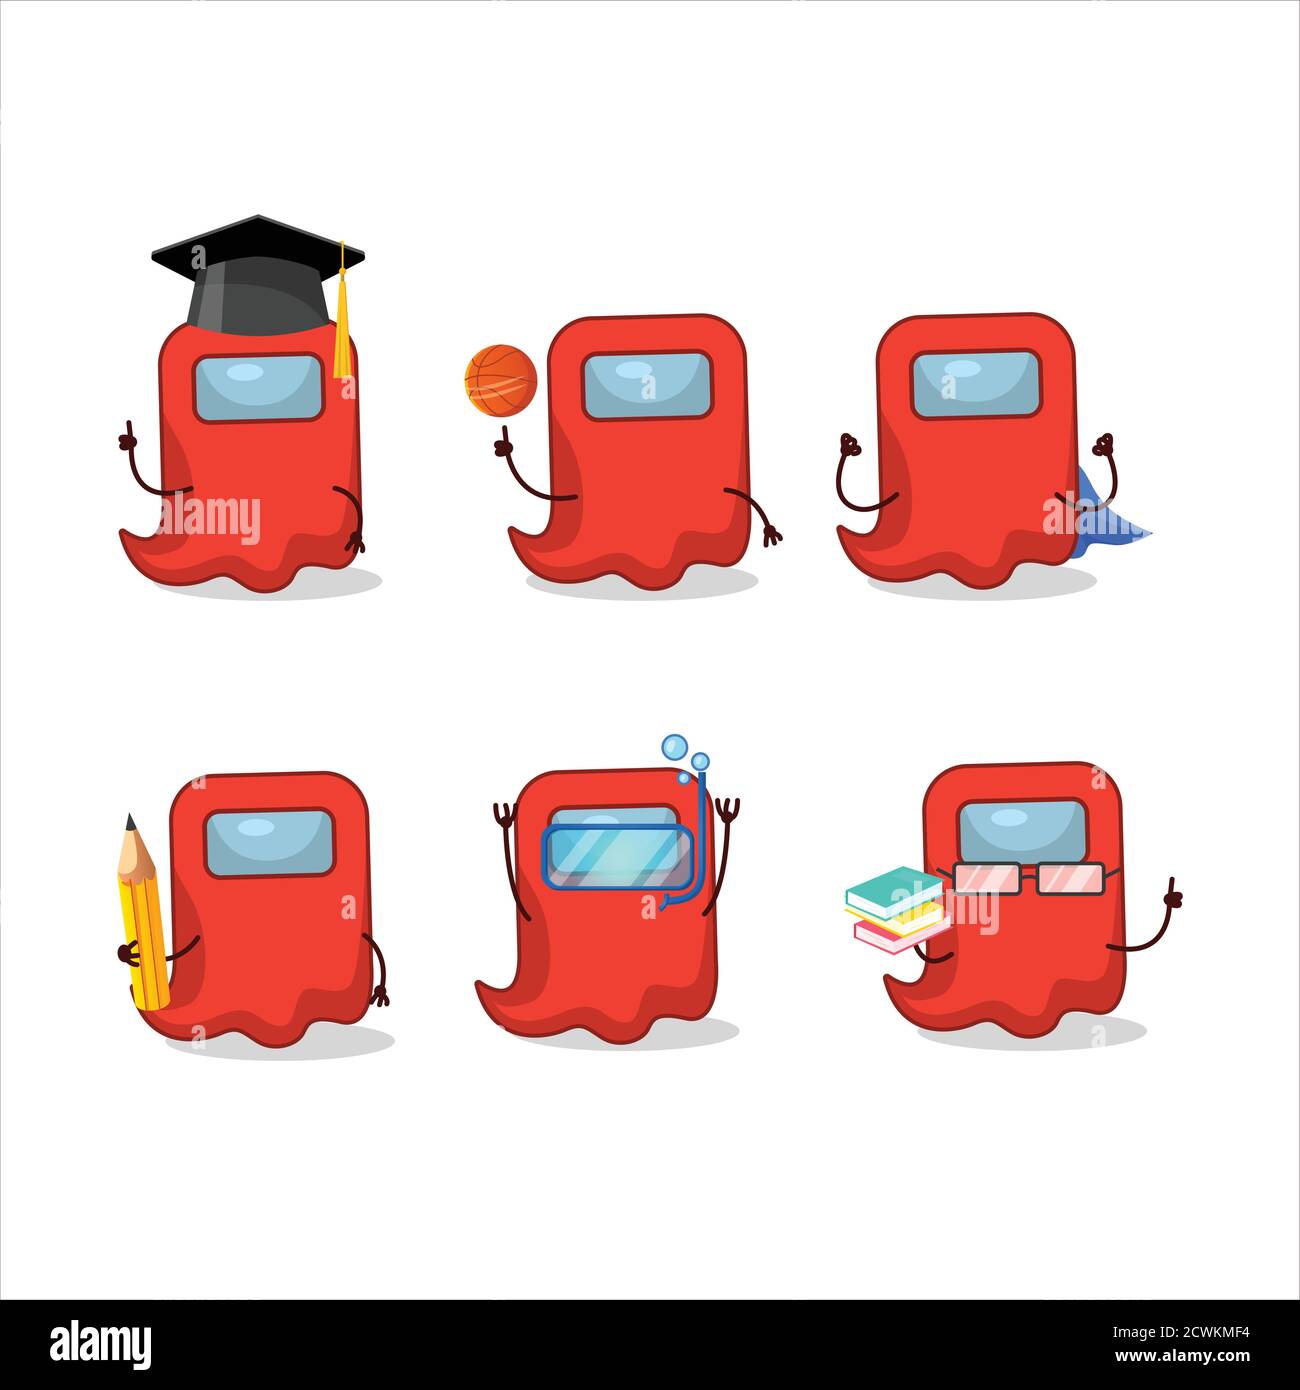 School student of ghost among us red cartoon character with various expressions Stock Vector